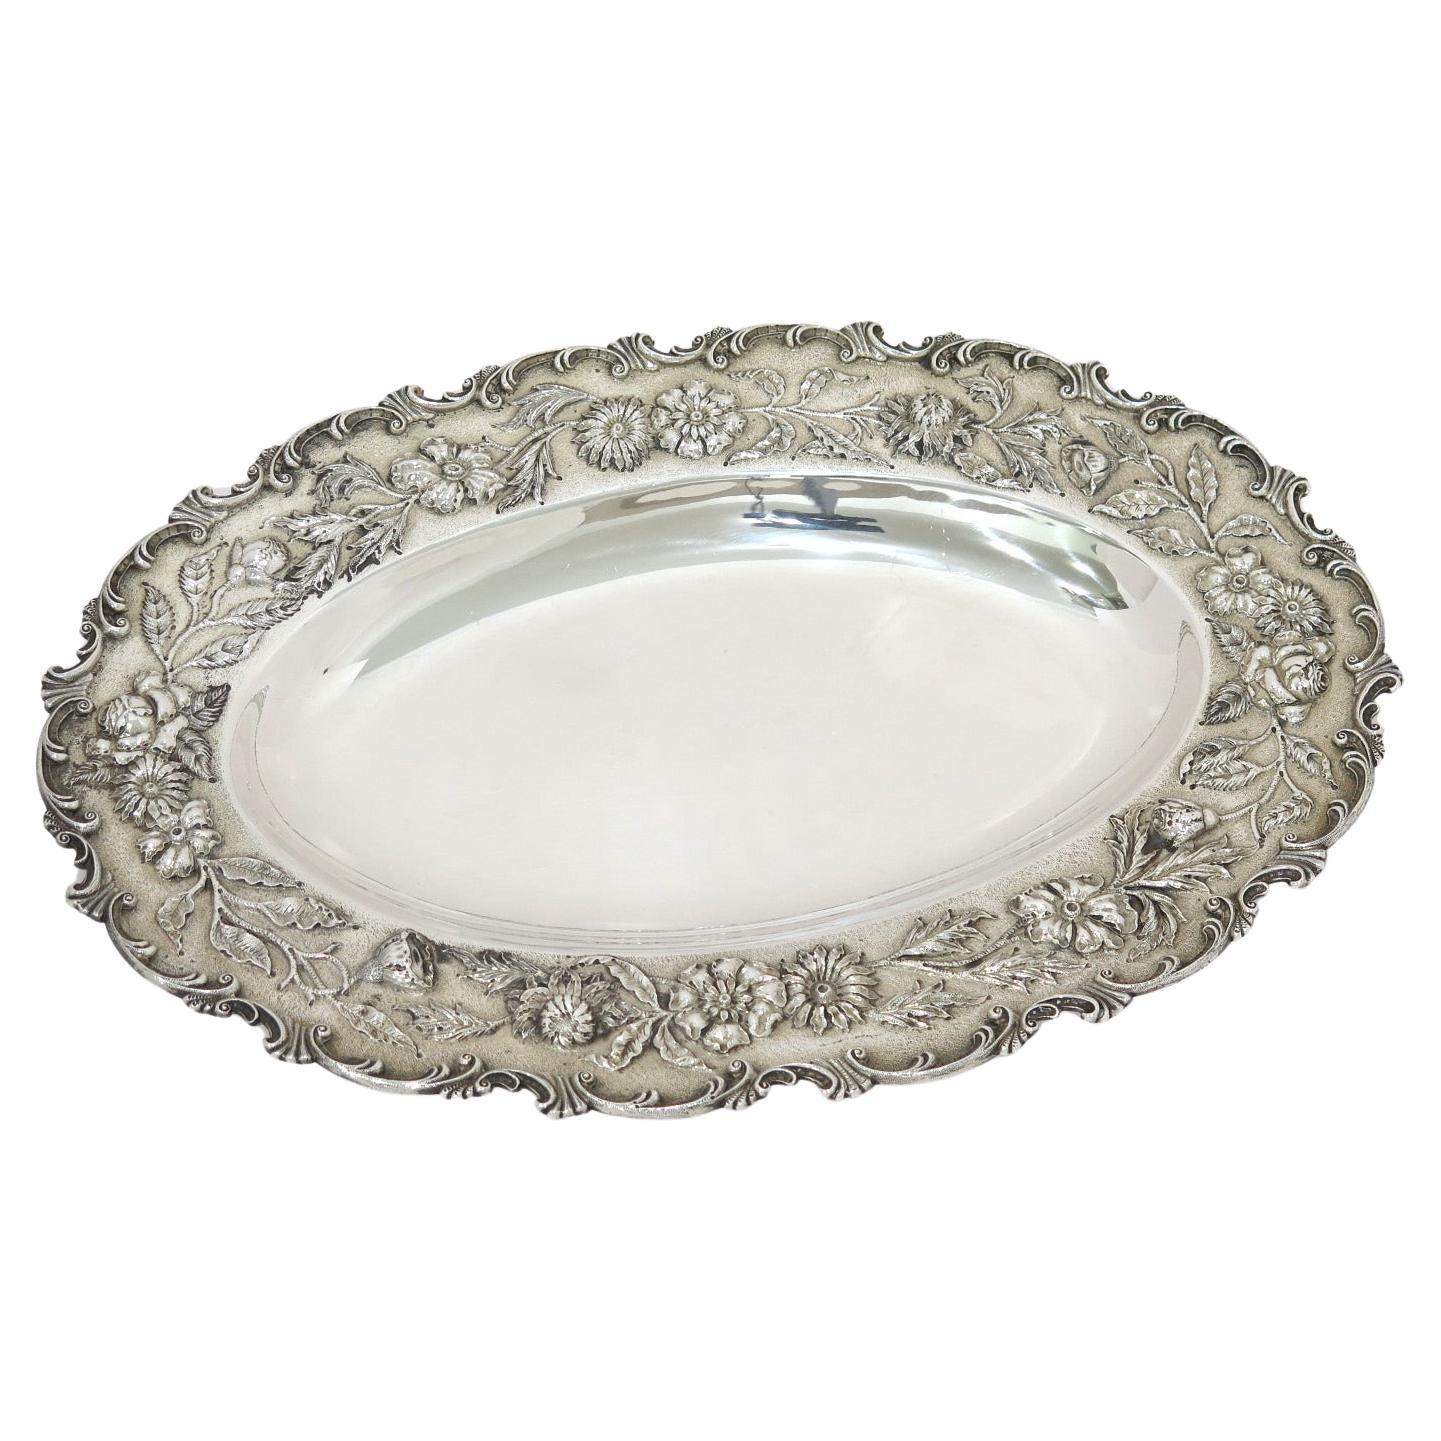 Sterling Silver S. Kirk & Son Antique Floral Repousse Oval Platter